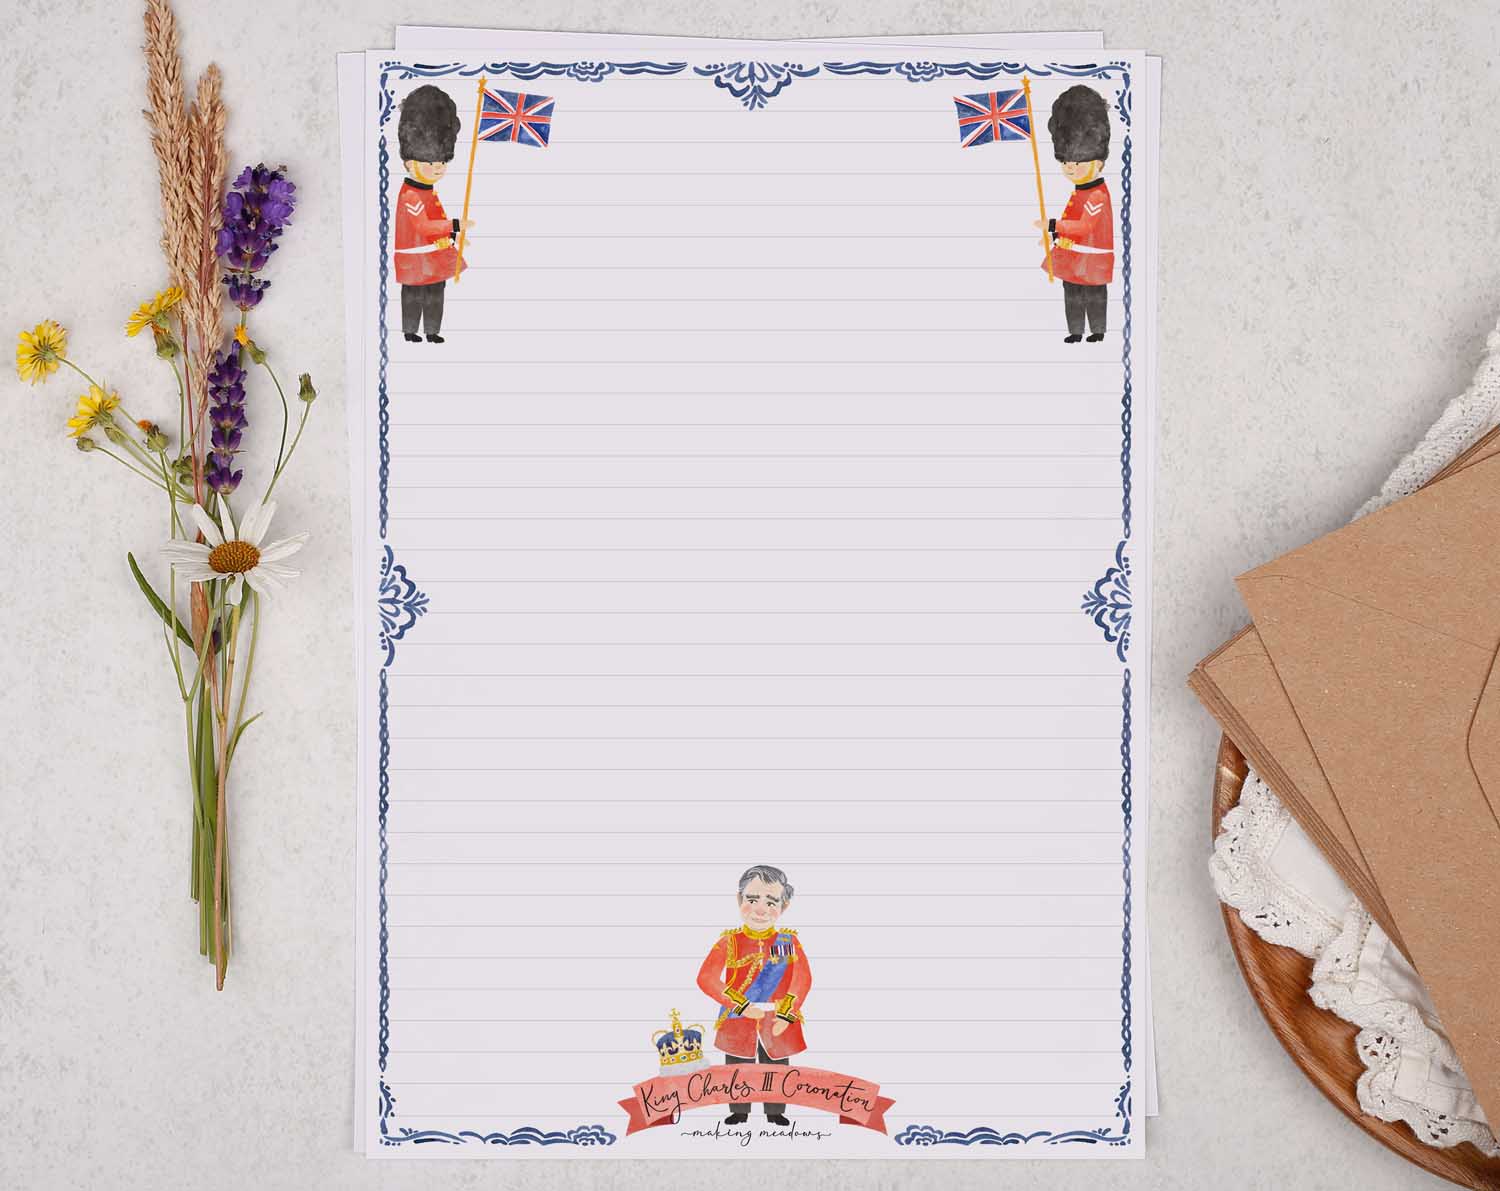 A4 letter writing paper sheets with a King Charles III Coronation border around the letter paper edge.